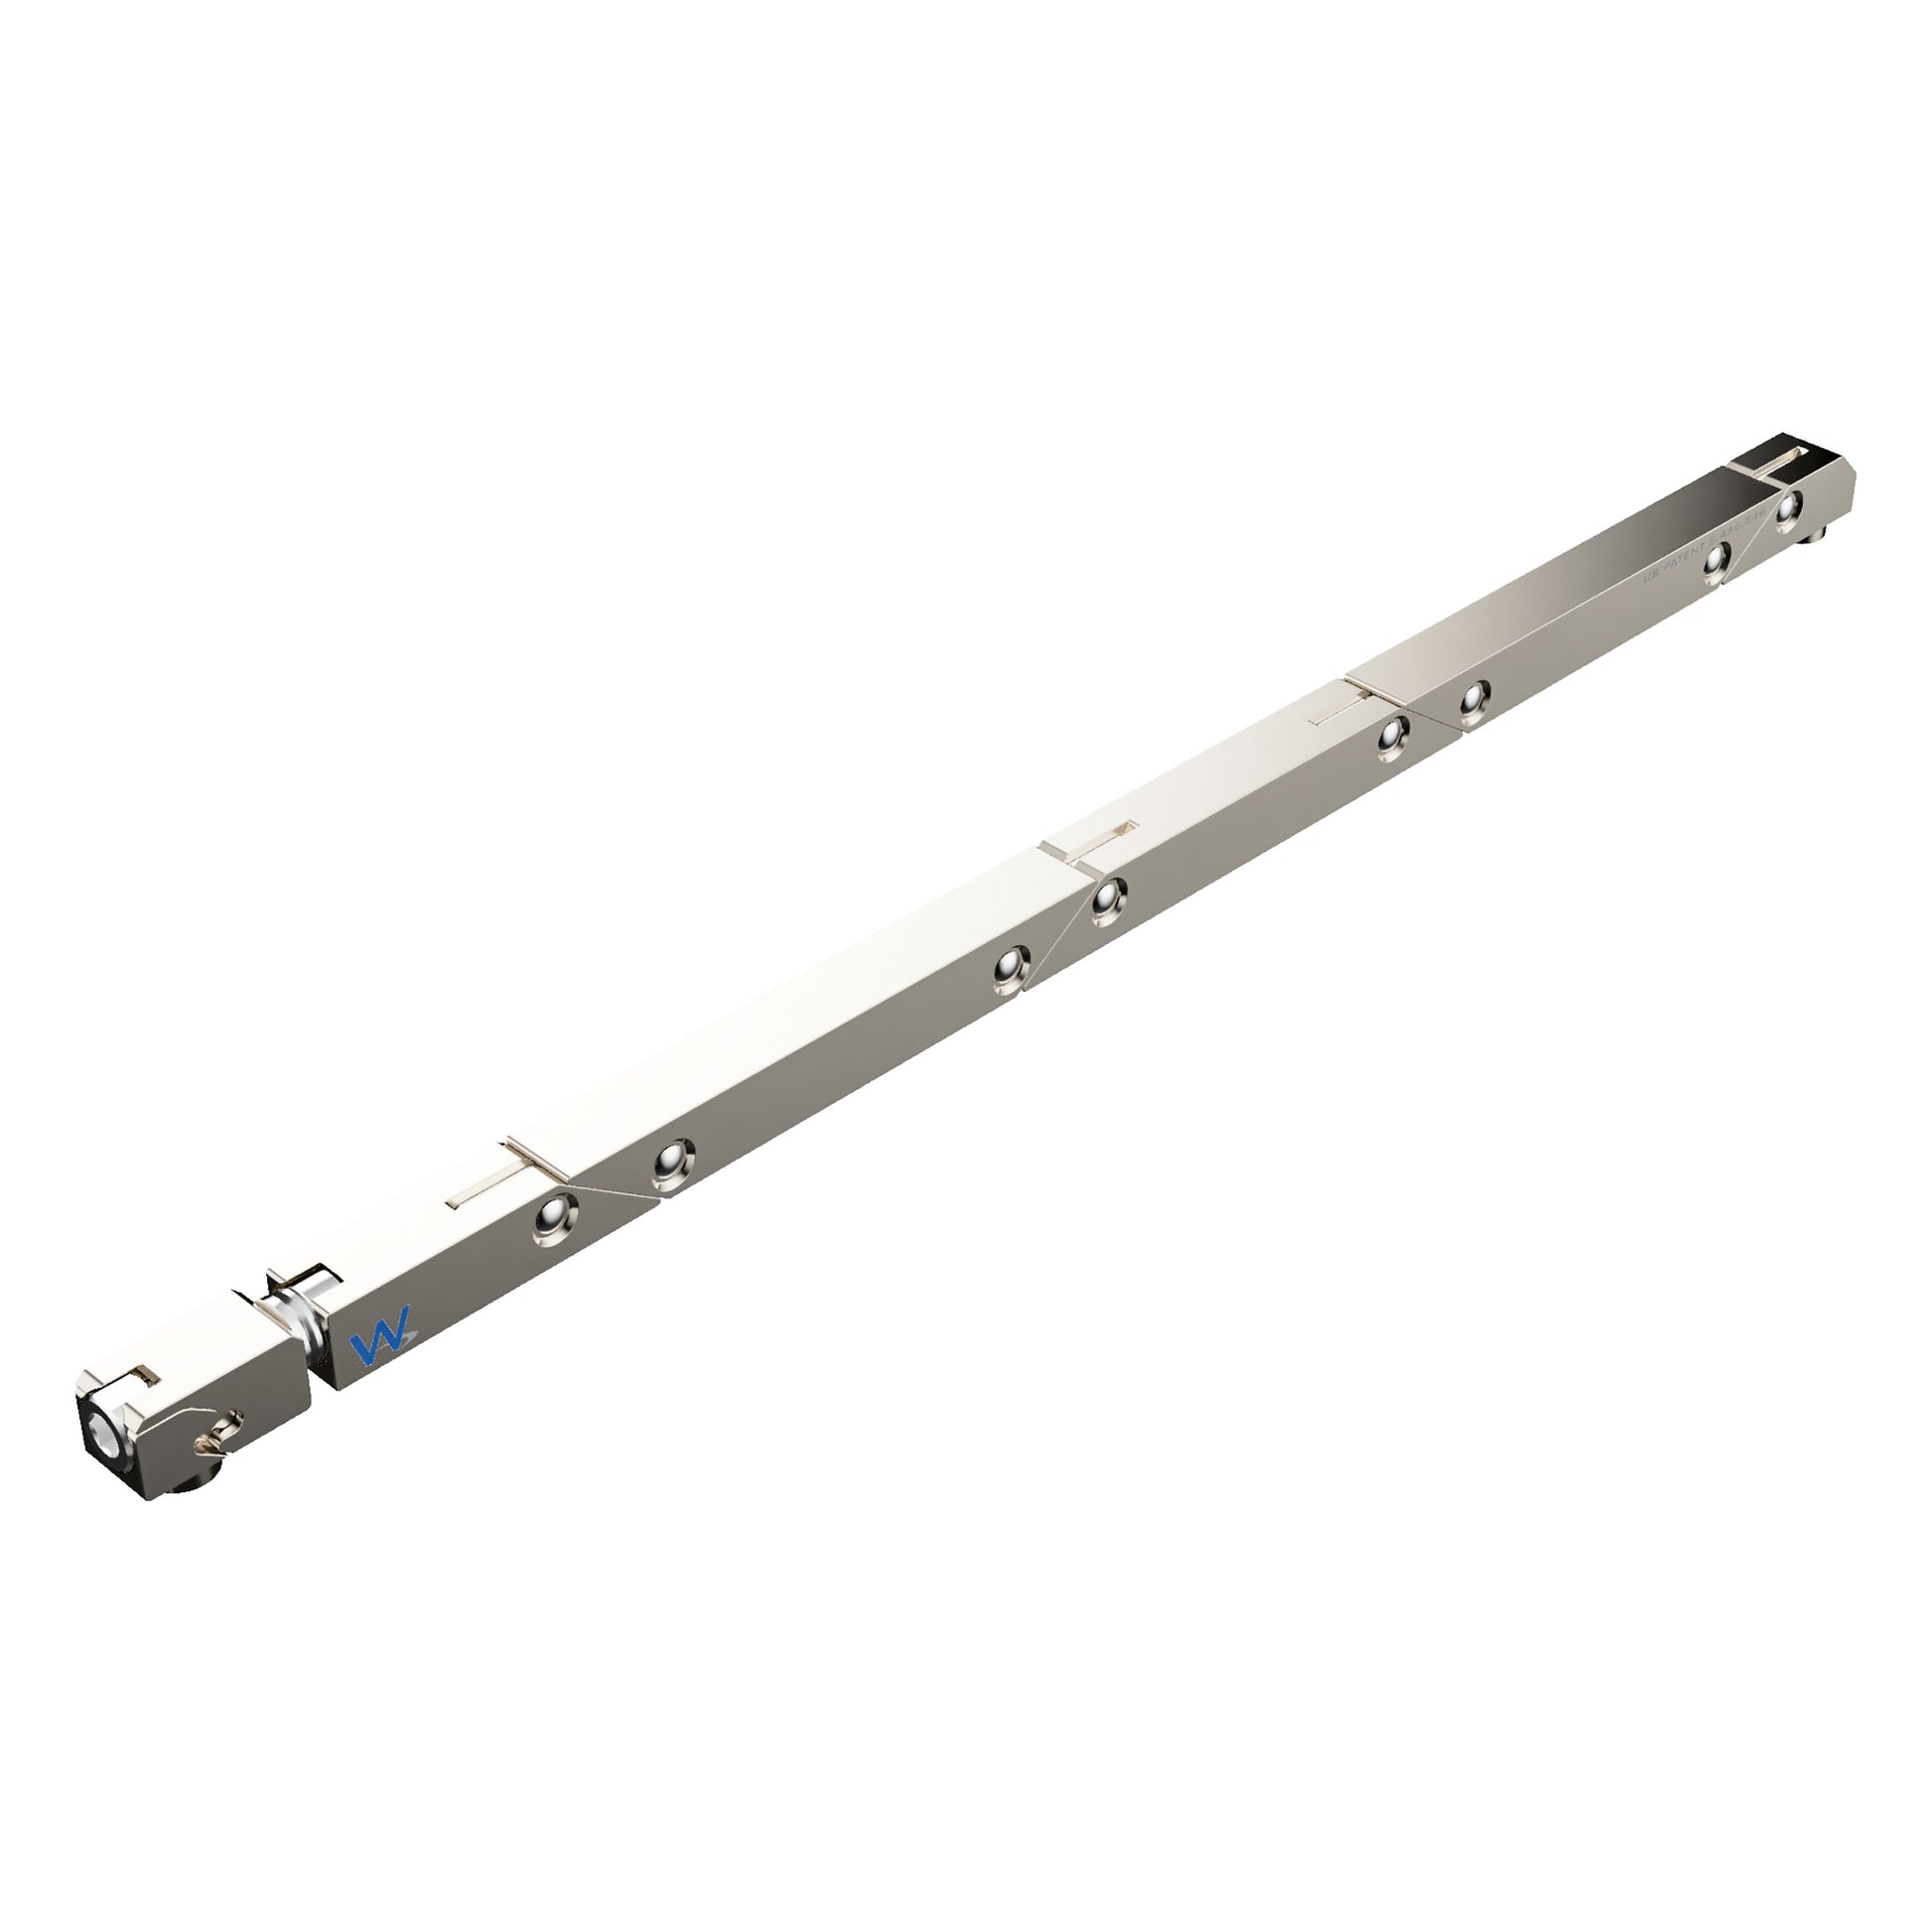 SW7-100-375-375 MAGNUM Wedgelock, segmented long rectulangular hardware component, Electroless Nickel Plated